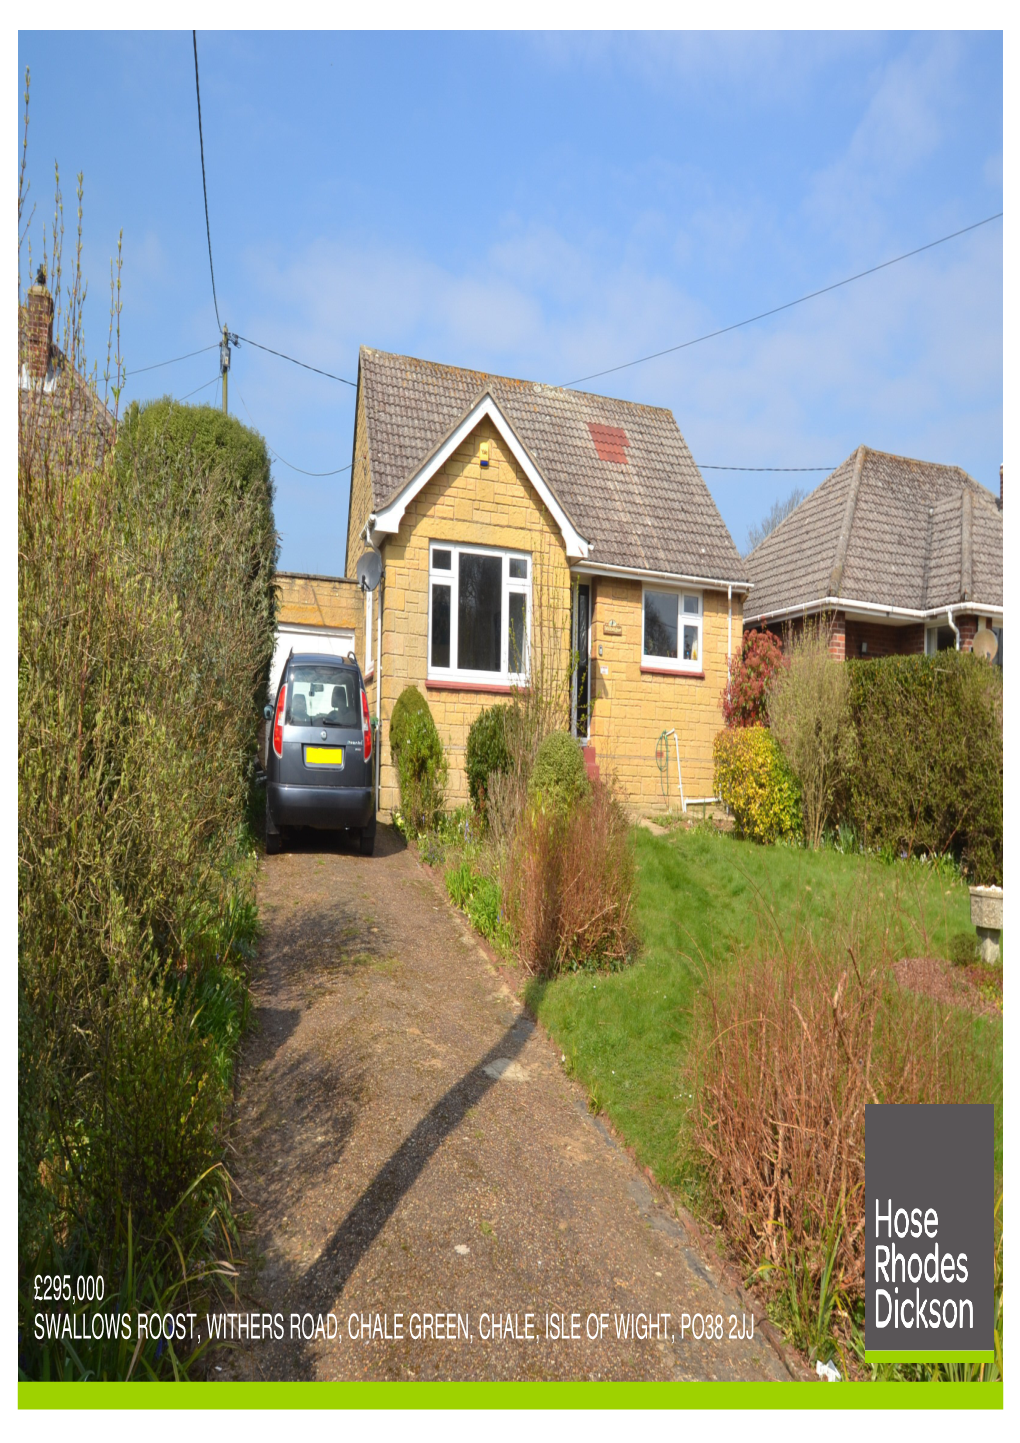 £295,000 Swallows Roost, Withers Road, Chale Green, Chale, Isle of Wight, Po38 2Jj